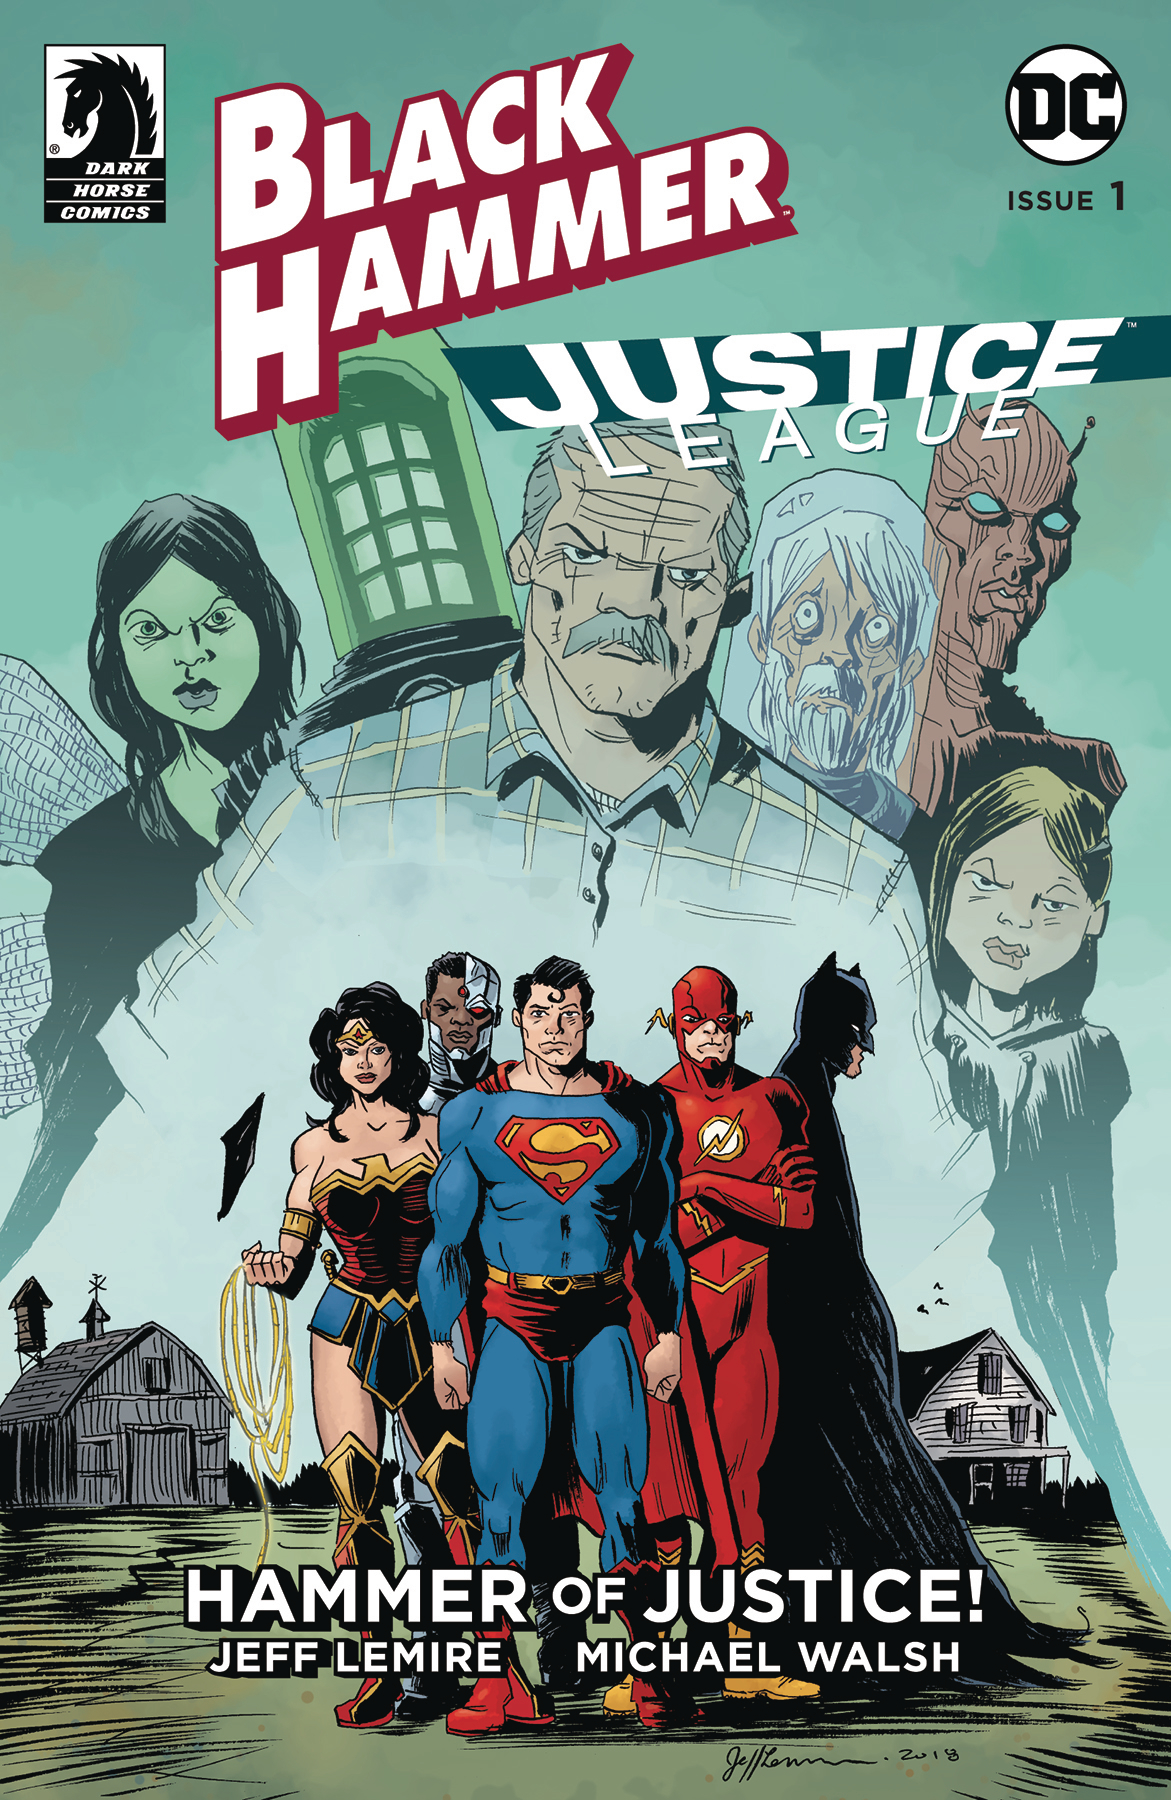 Black Hammer Justice League no. 1 (Lemire Variant) (1 of 5) (2019 Series)